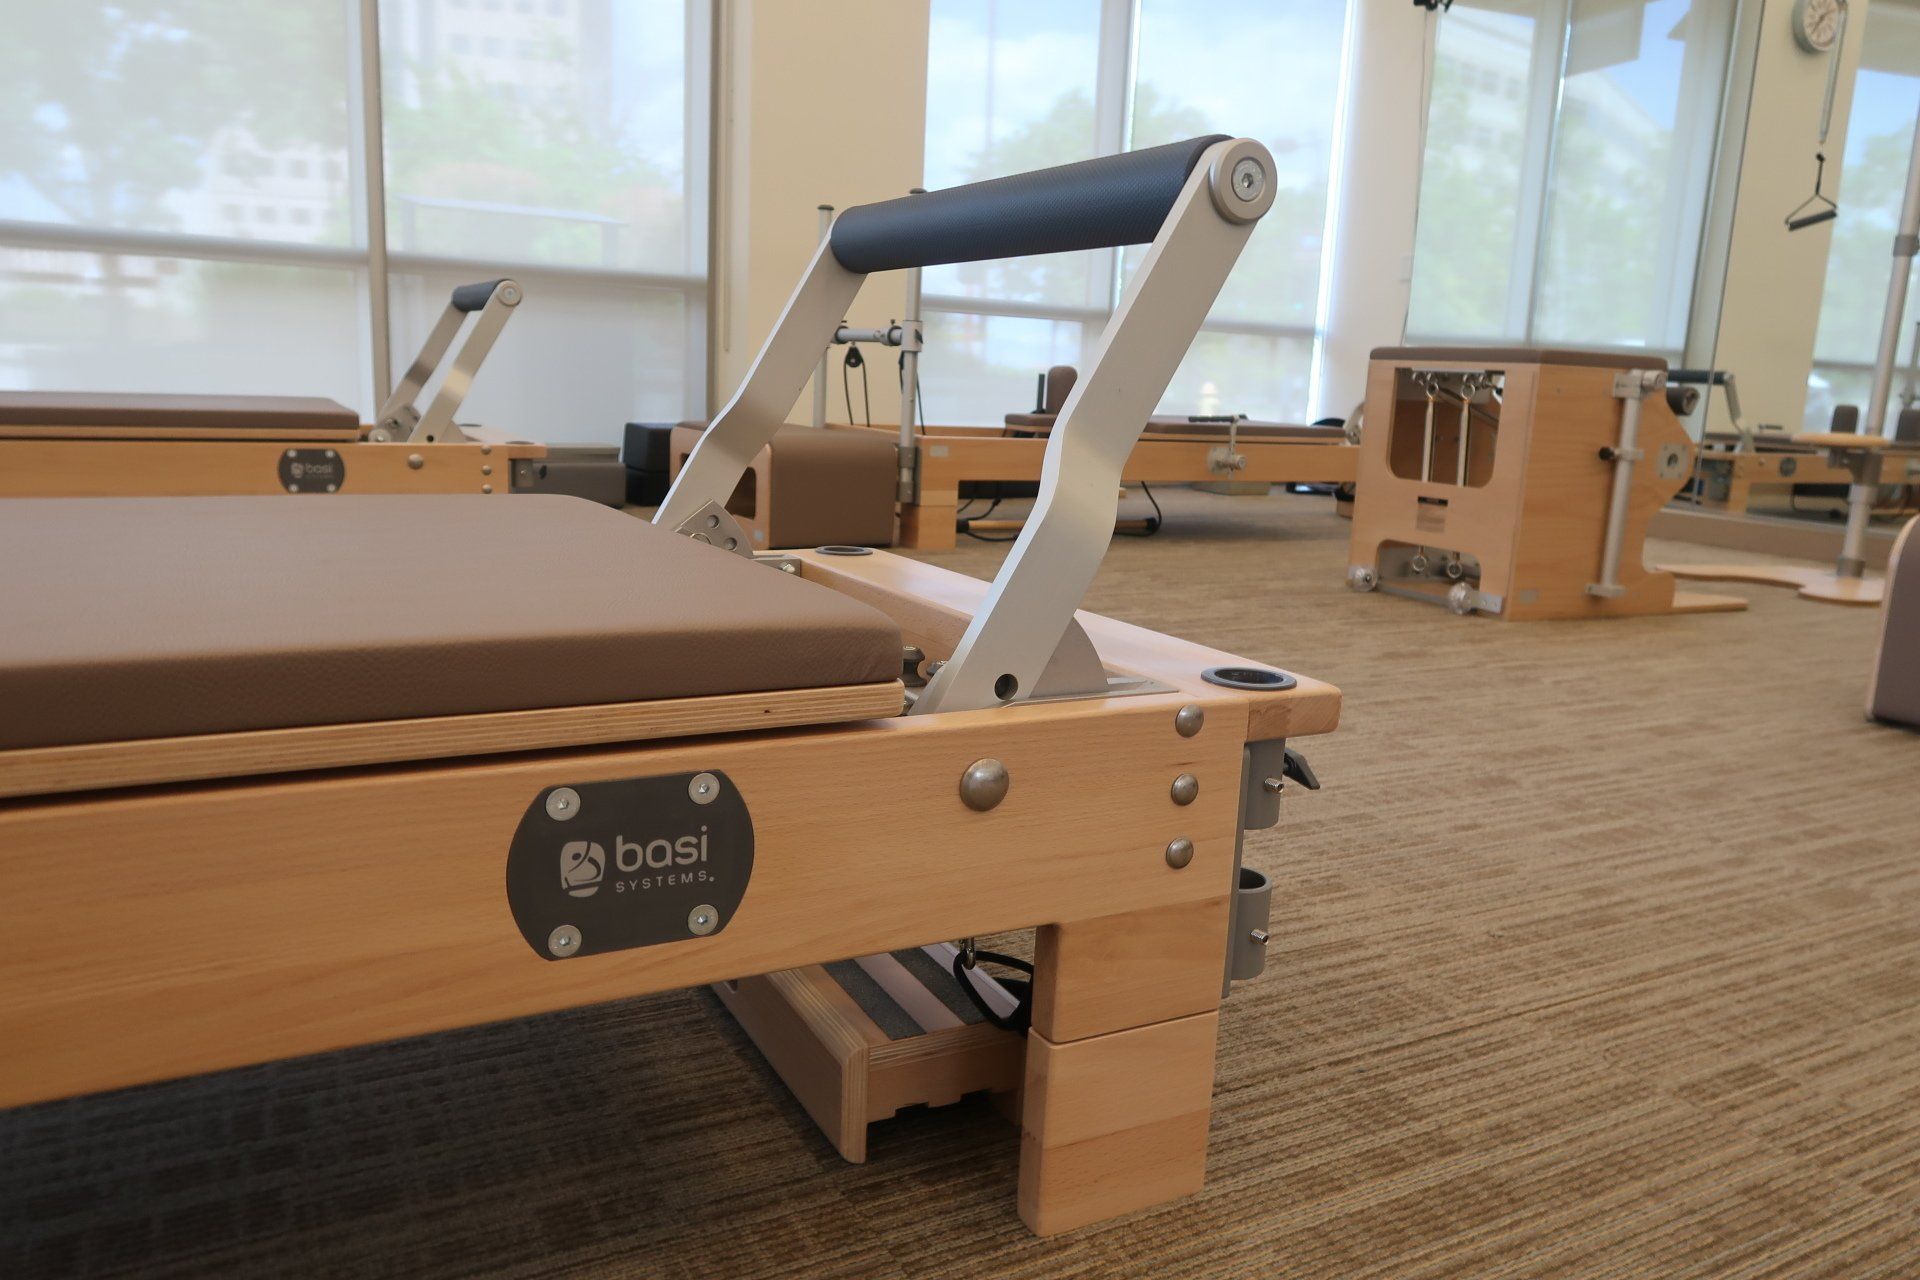 pilates sets of equipment for instruction and group classes